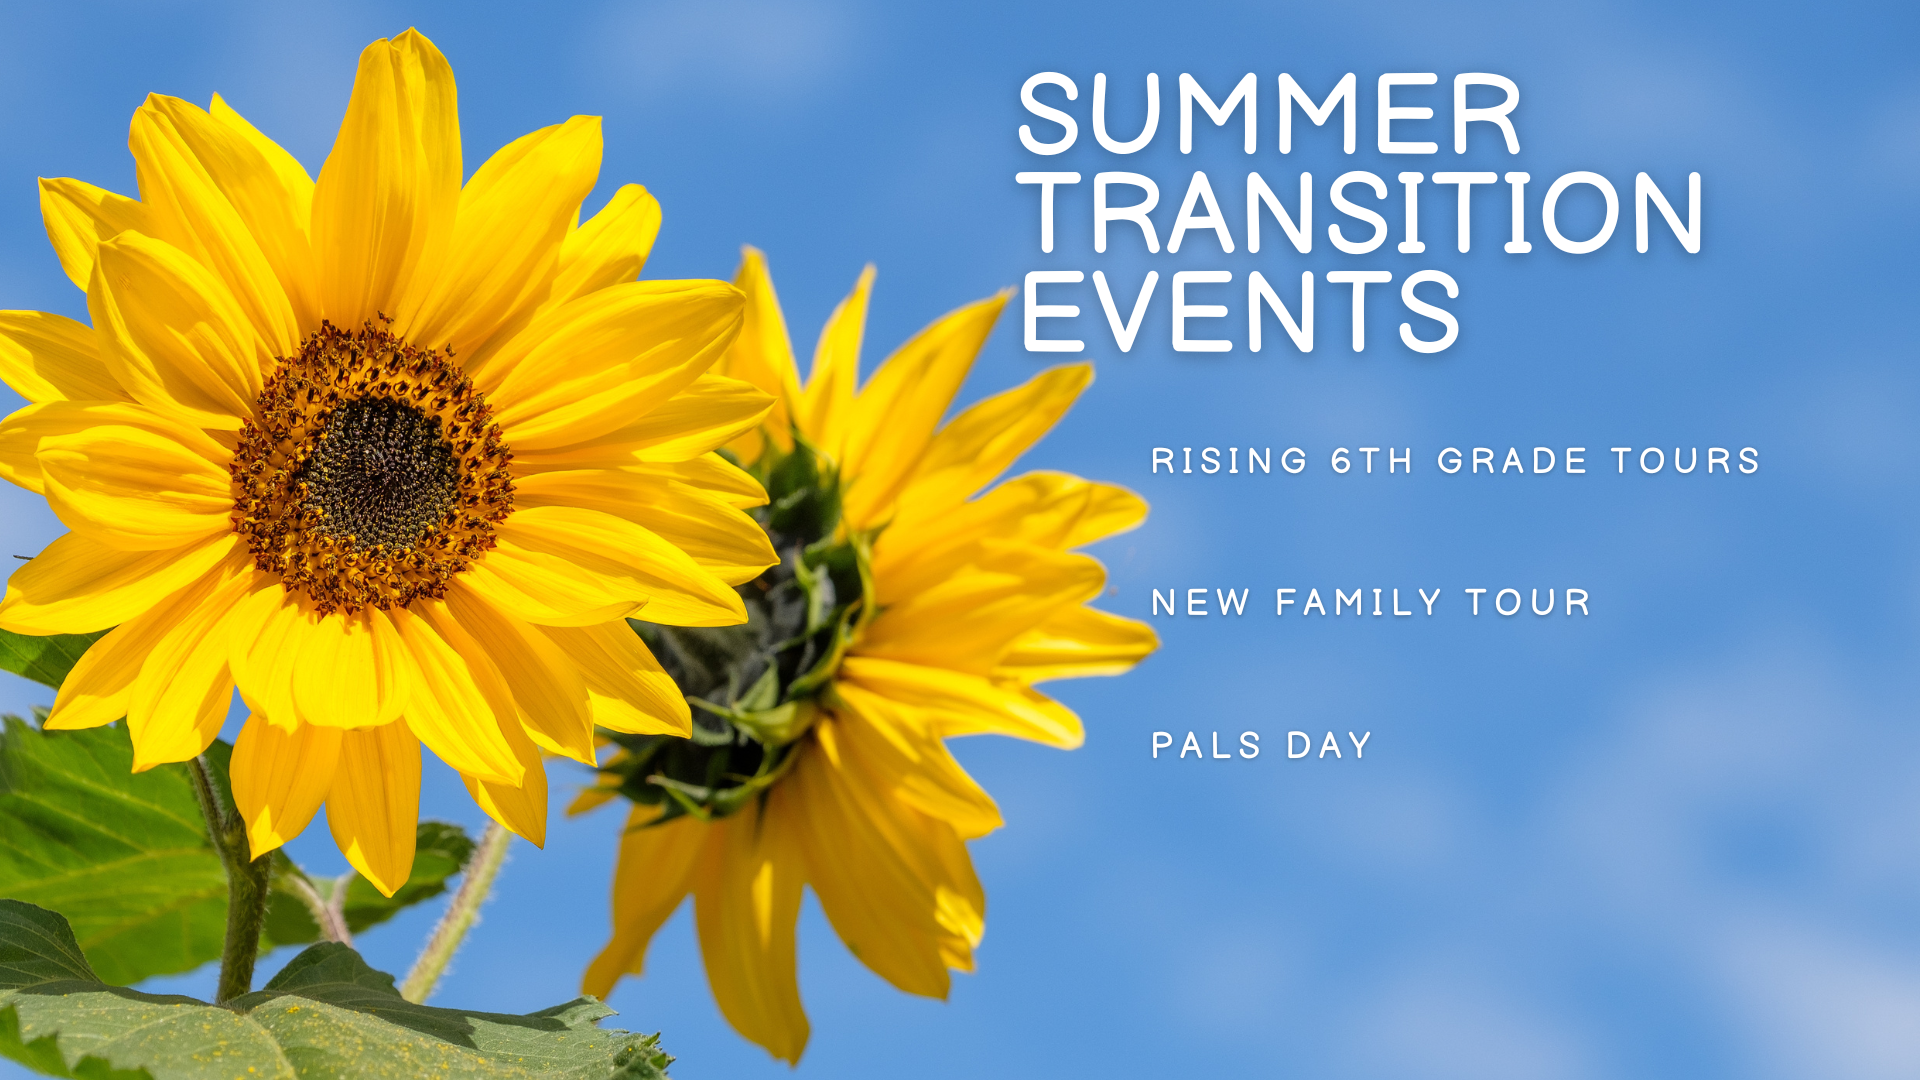 Summer transition events